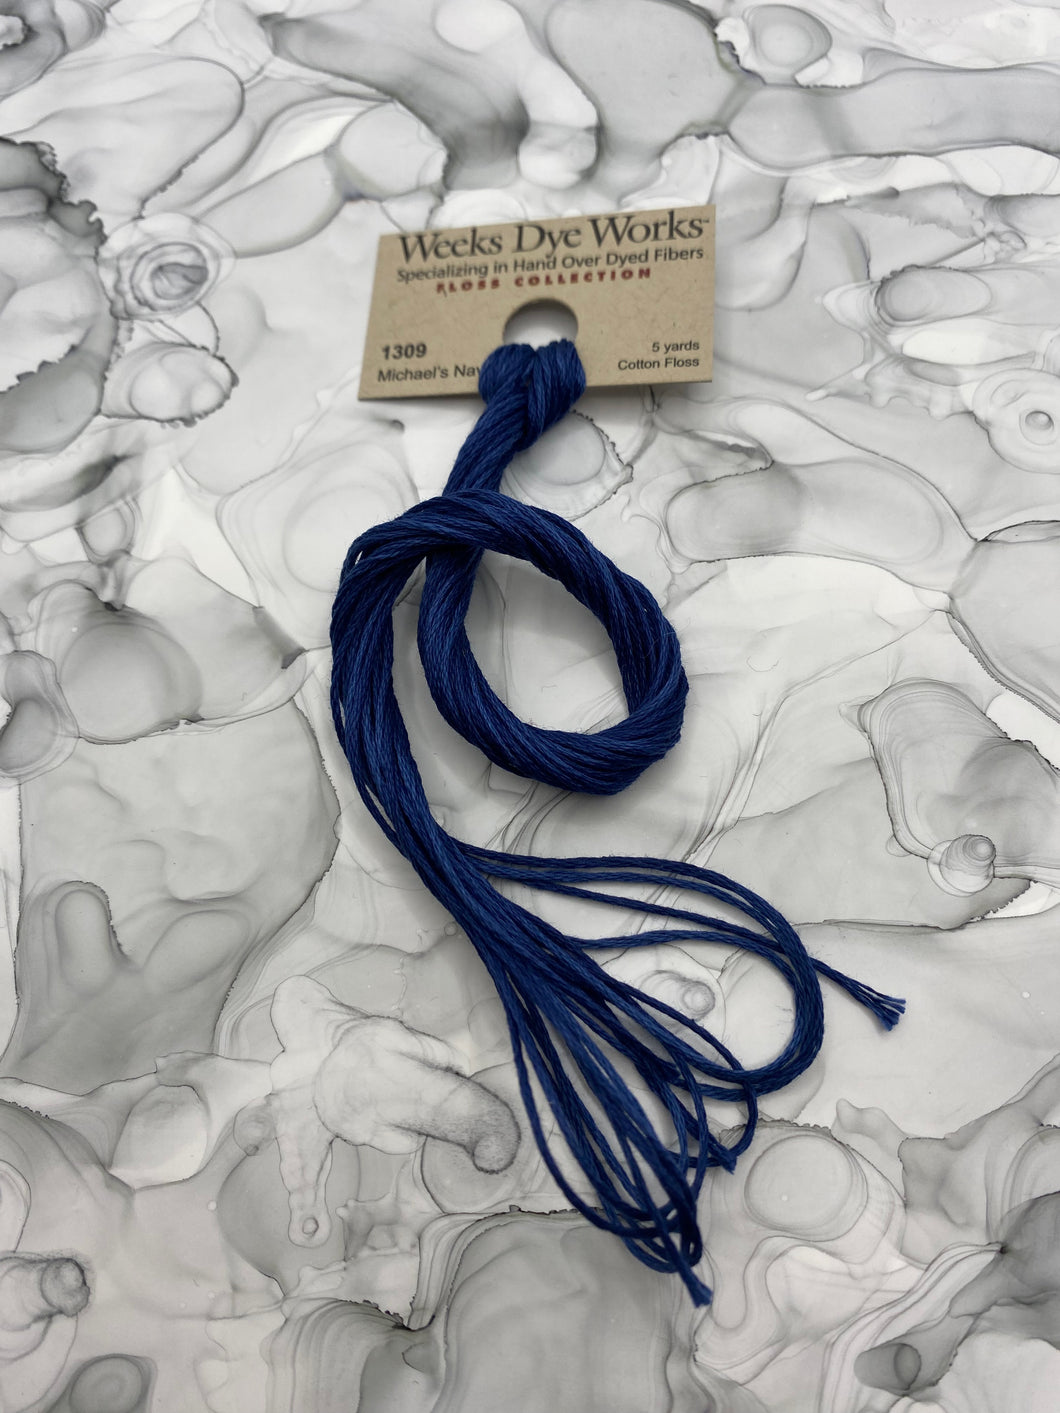 Michael's Navy (#1309) Weeks Dye Works, 6-strand cotton floss